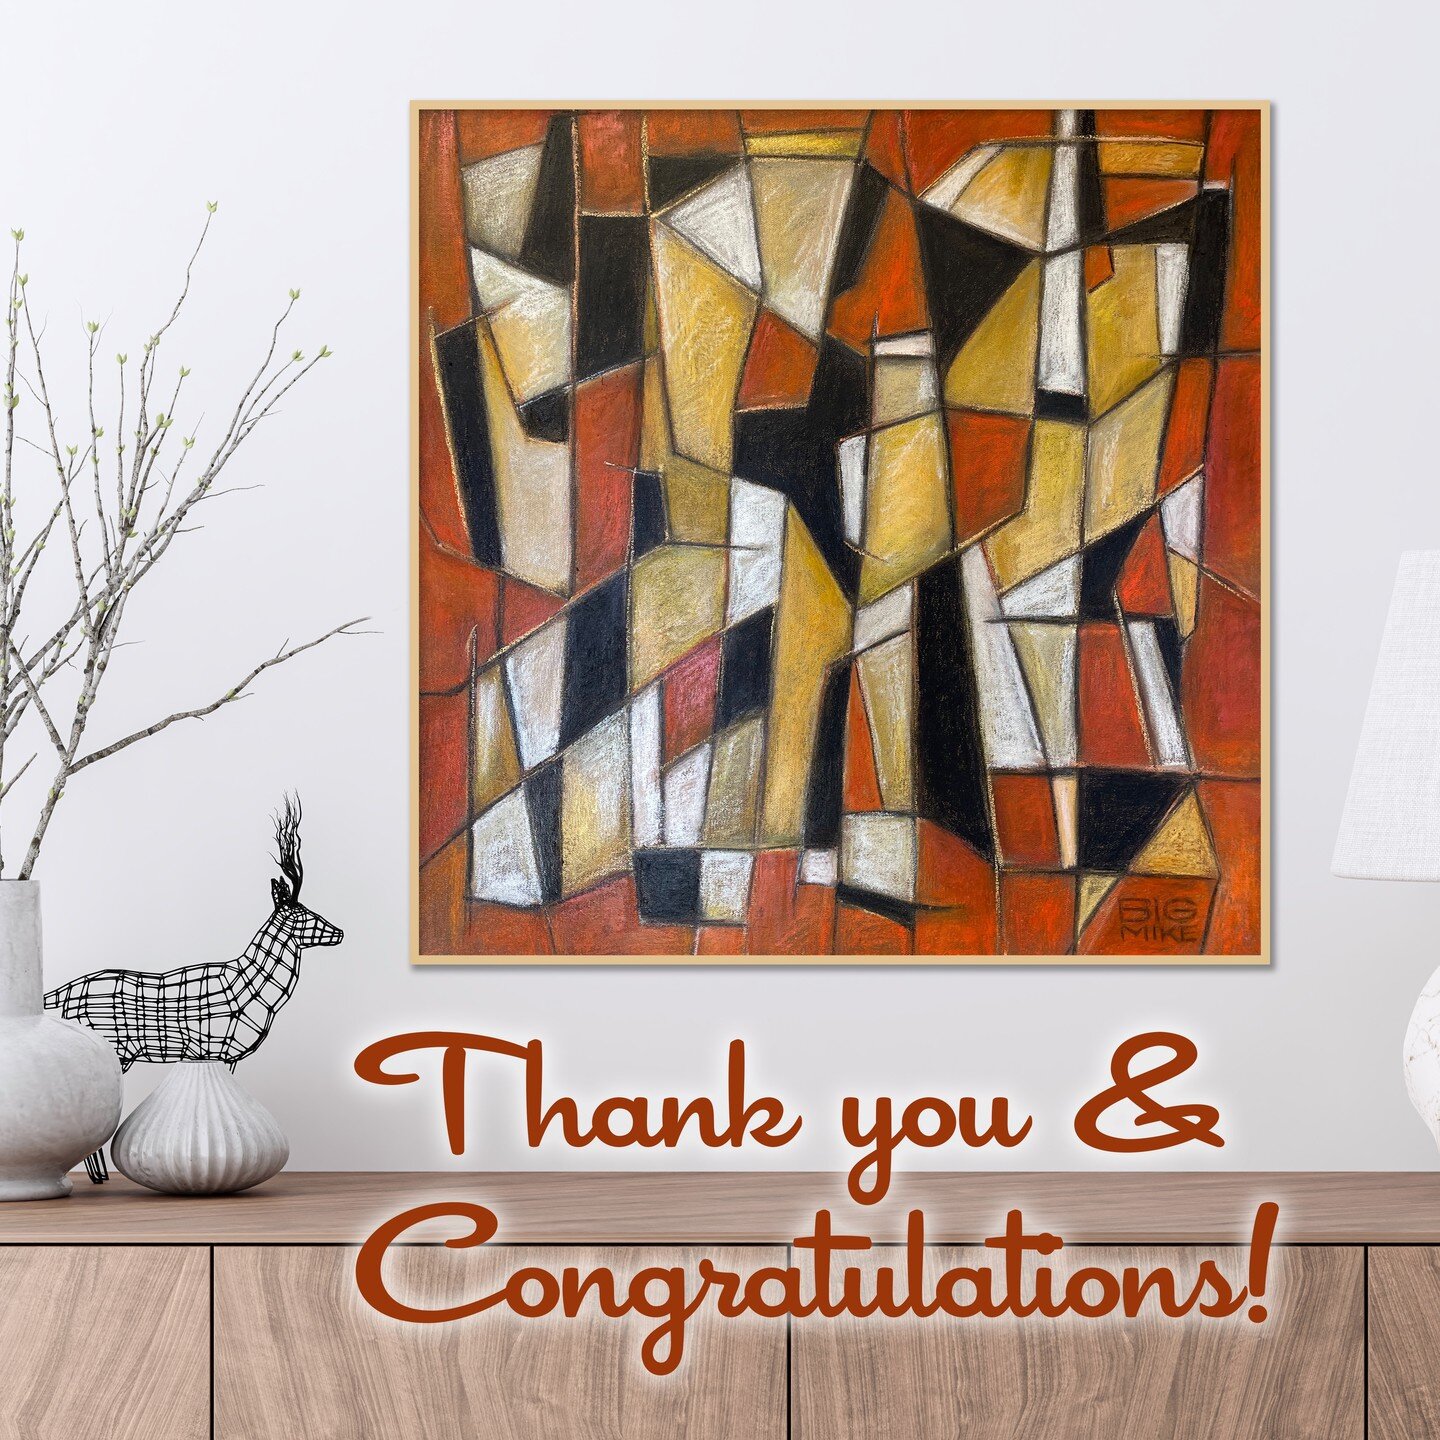 A giant Thank You and Congratulations to Daniel on his acquisition on one of my favorite pieces, Road to Coba. The piece has found a wonderful home in the Deepwell Estates neighborhood of Palm Springs! Thanks again Daniel!

&bull;
BigMikeArt.com &bul